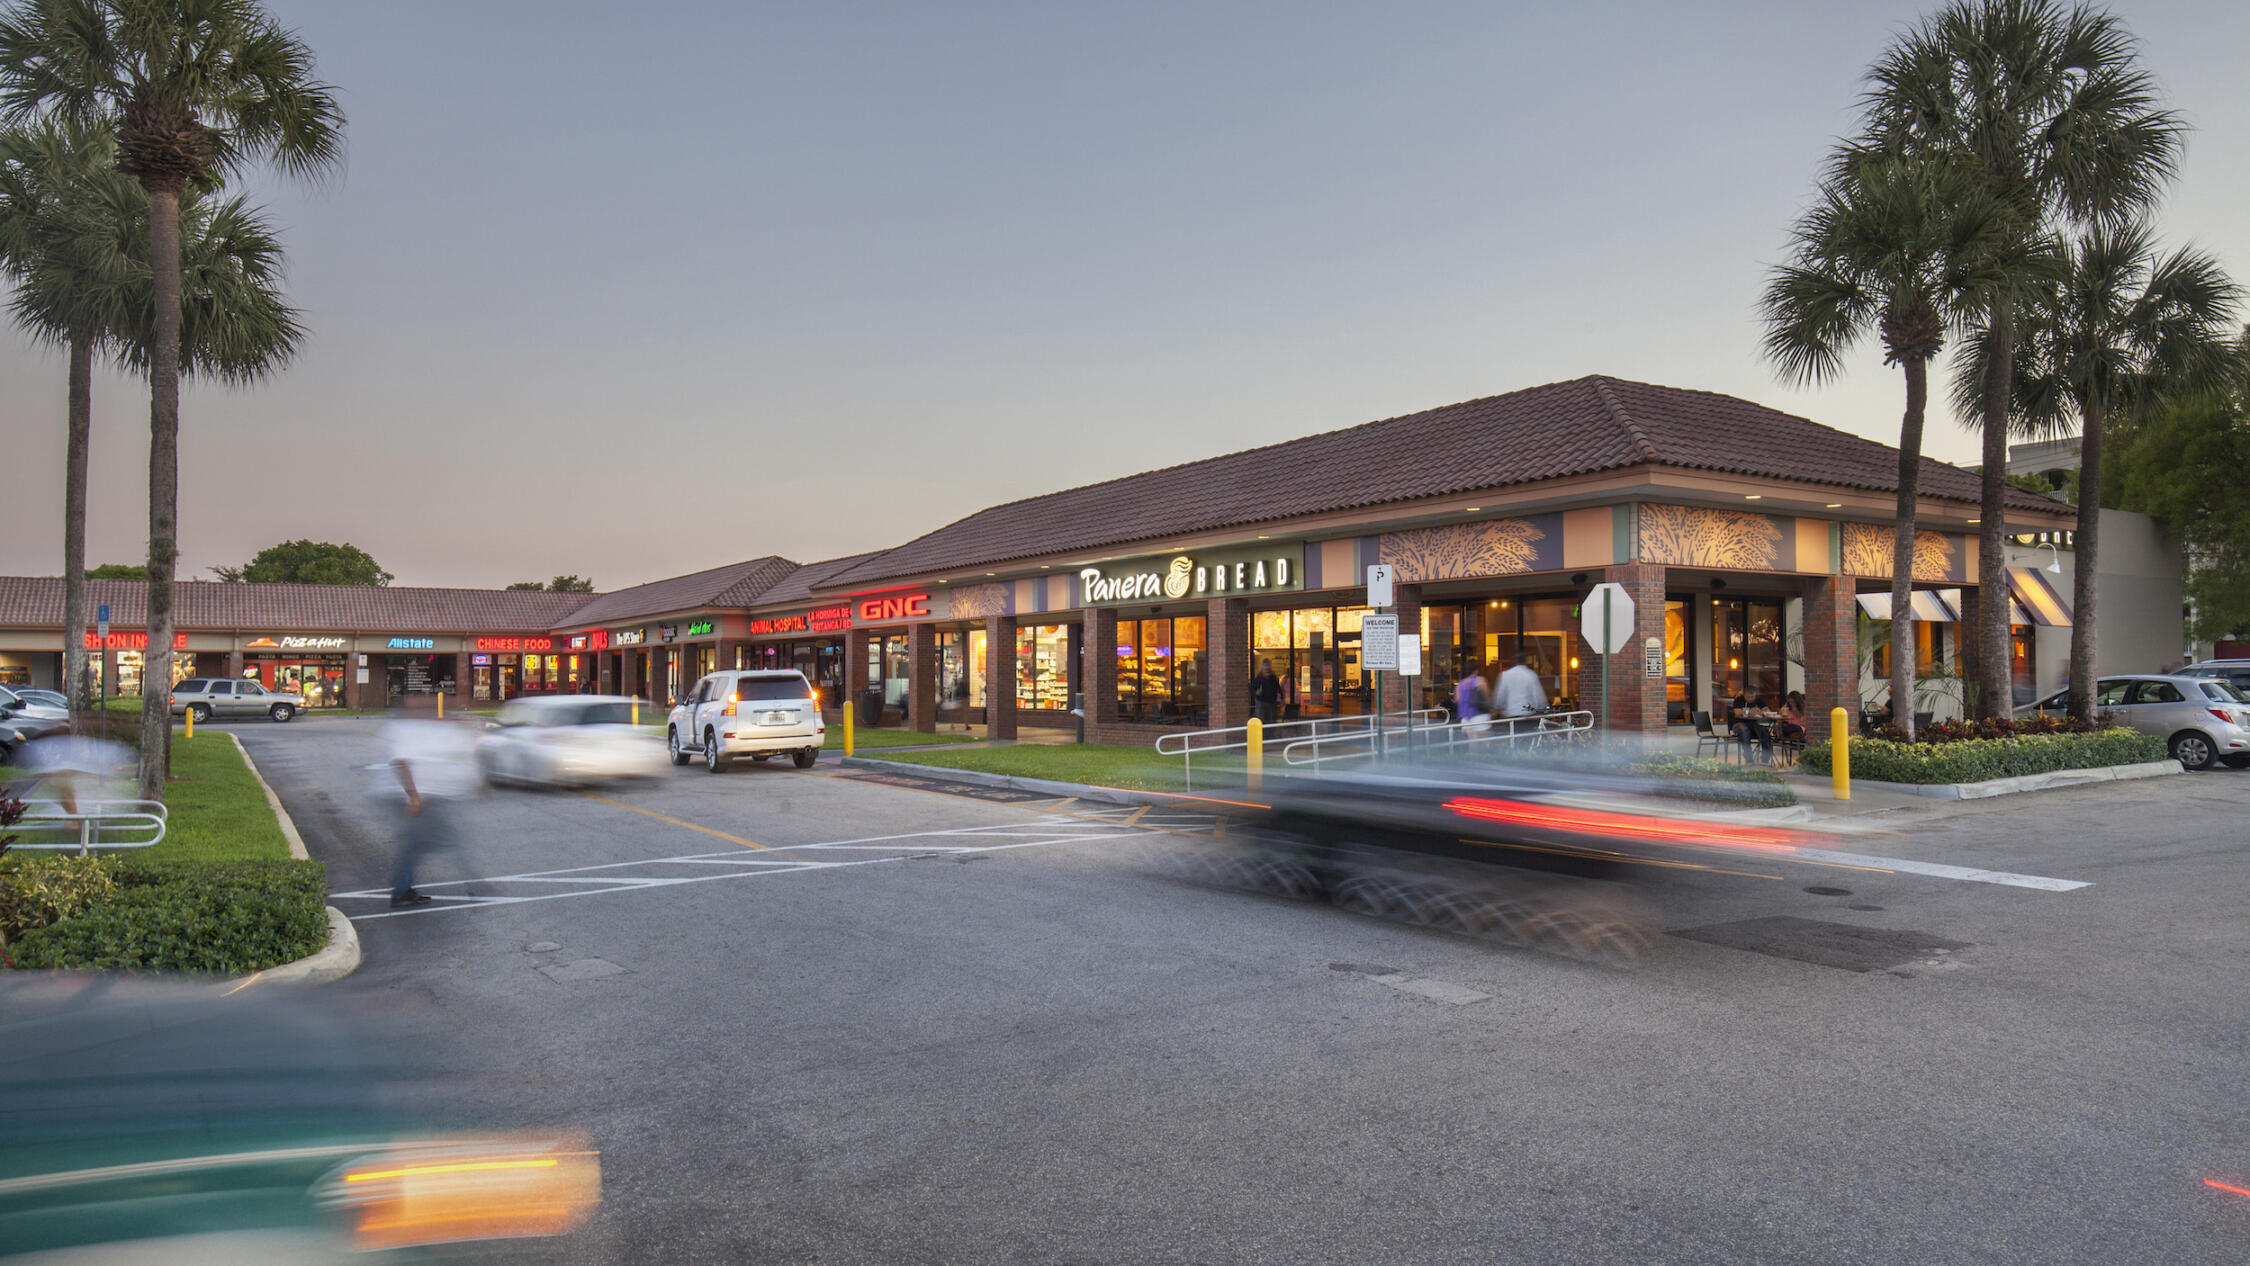 Country Club Plaza exterior with rows of shops and cars driving in parking lot